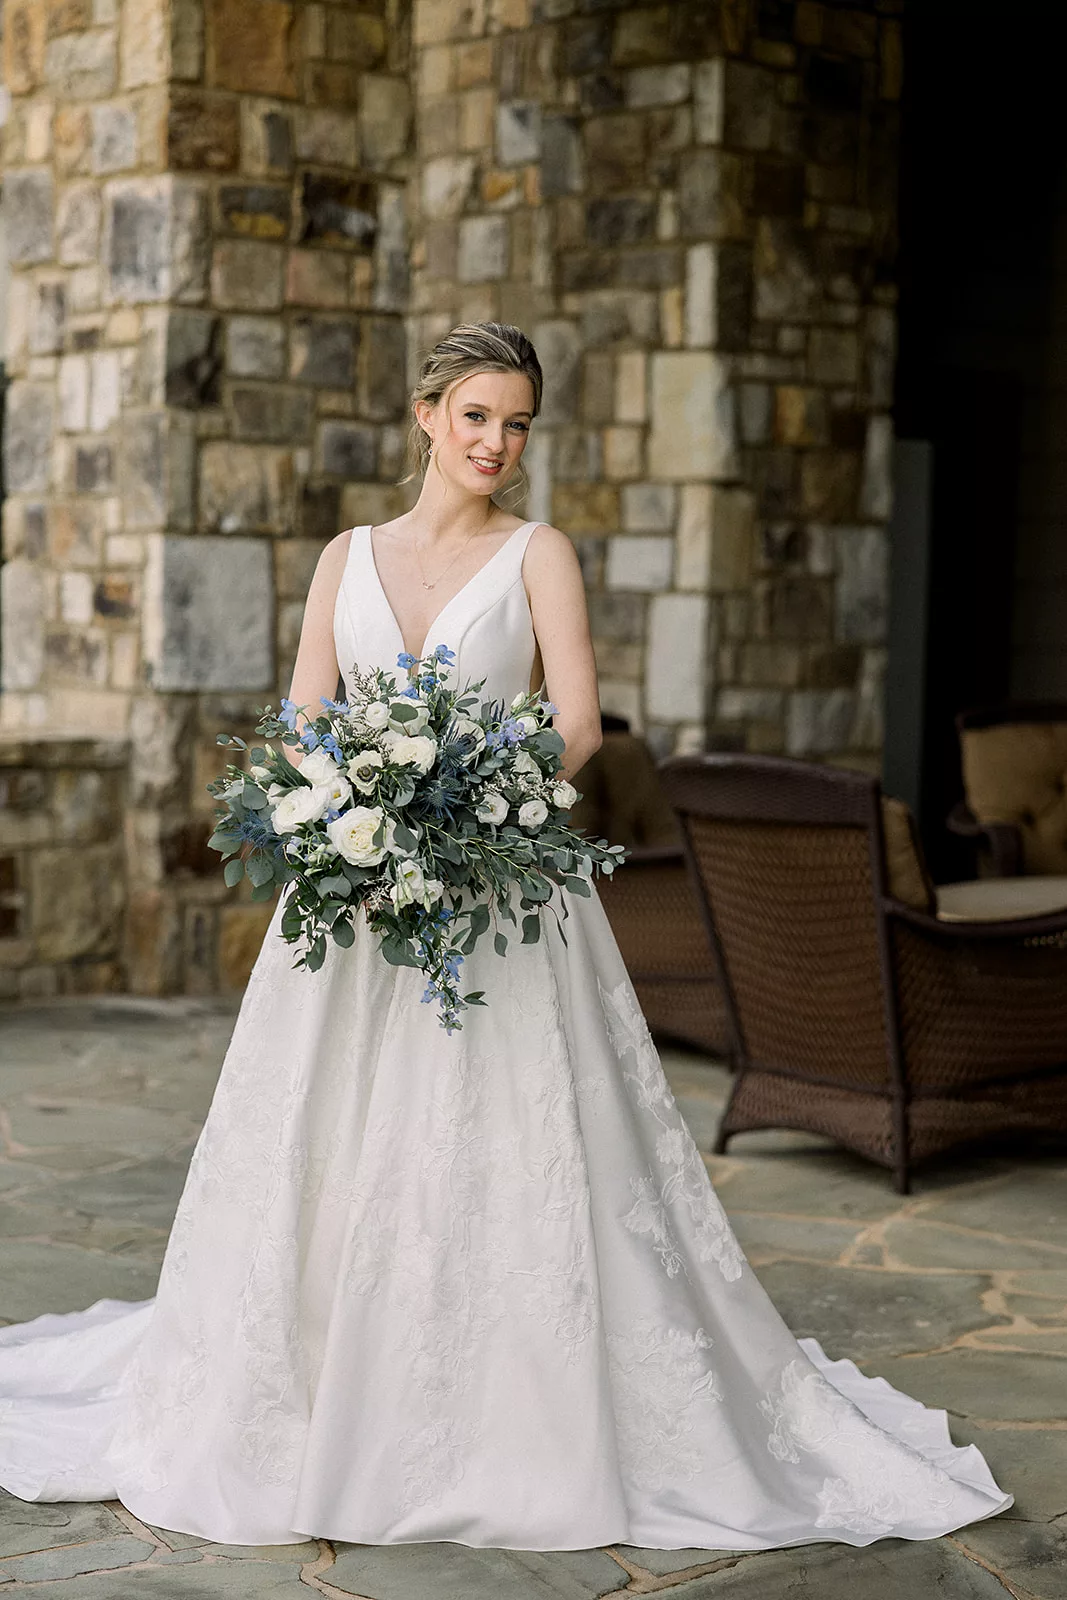 A bride stands on a stone patio holding her flowers